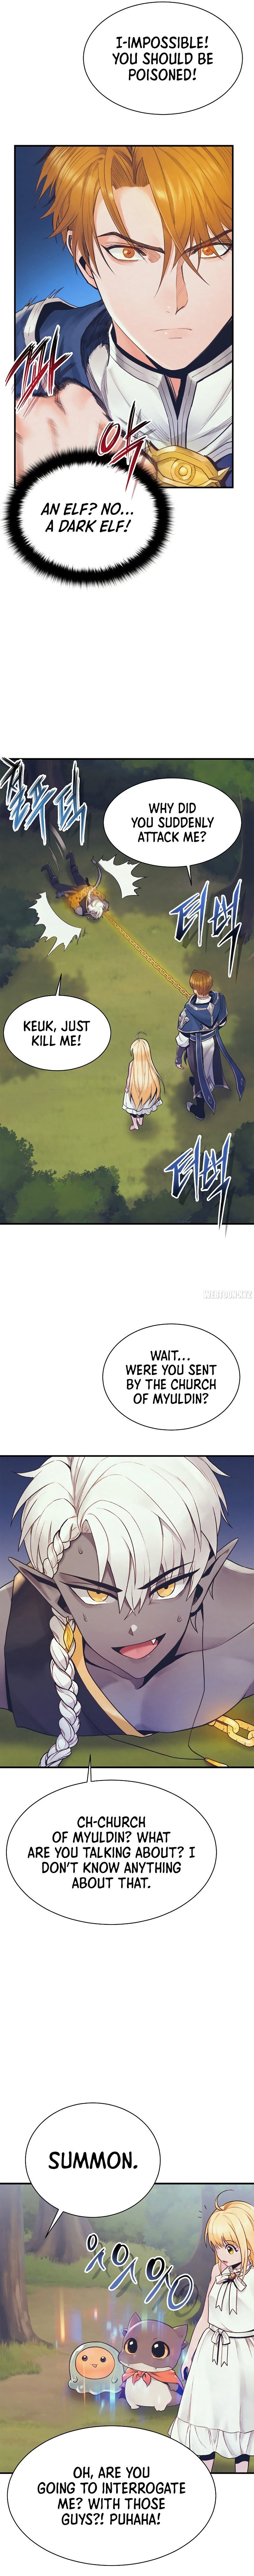 the-healing-priest-of-the-sun-chap-82-11